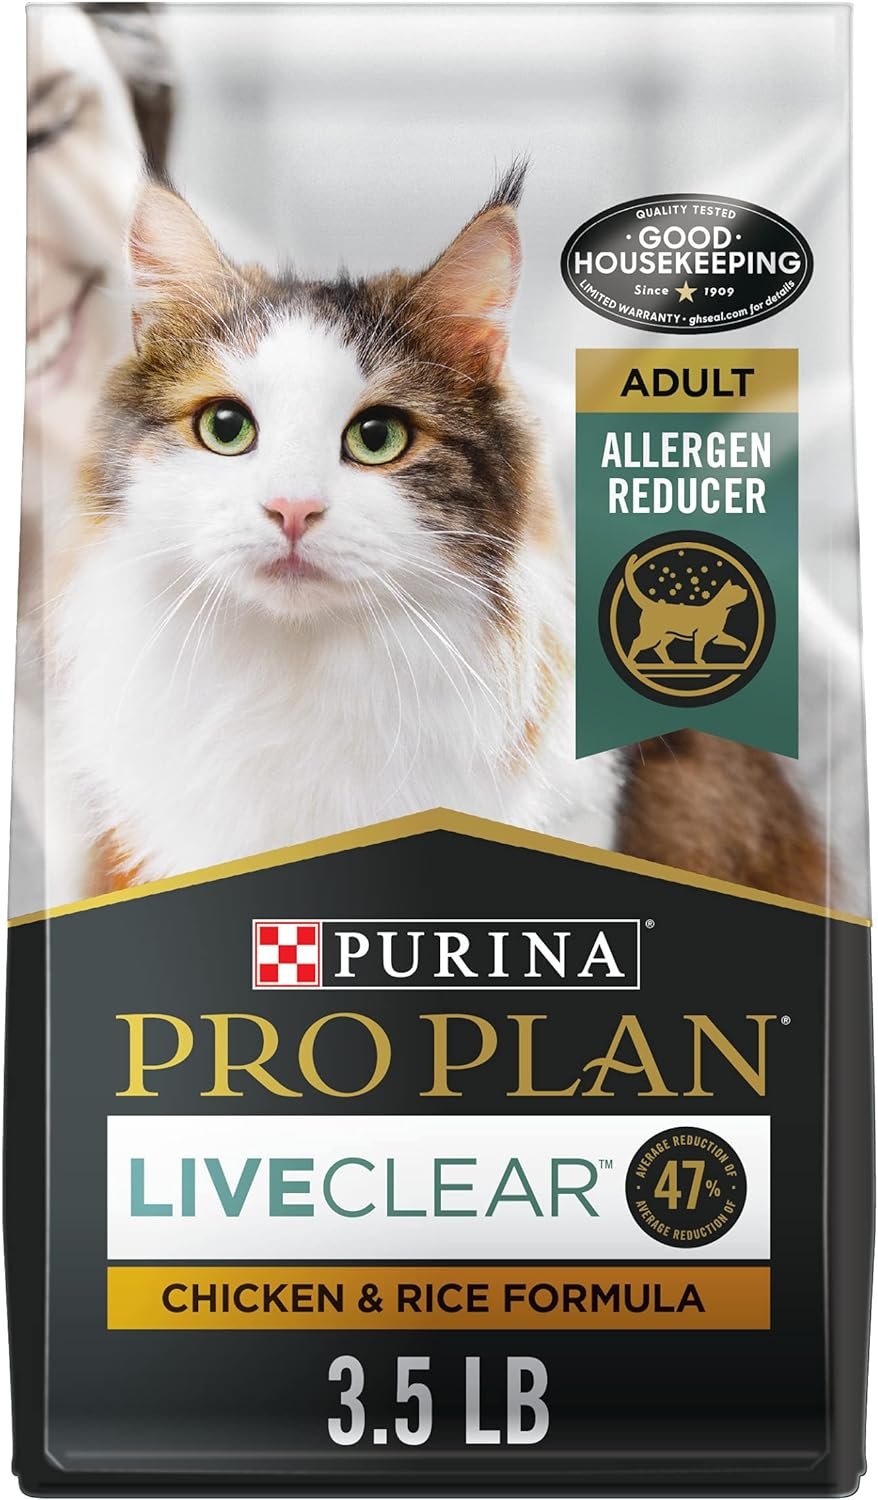 Purina Pro Plan Allergen Reducing, High Protein Cat Food, LIVECLEAR Chicken and Rice Formula – 3.5 lb. Bag